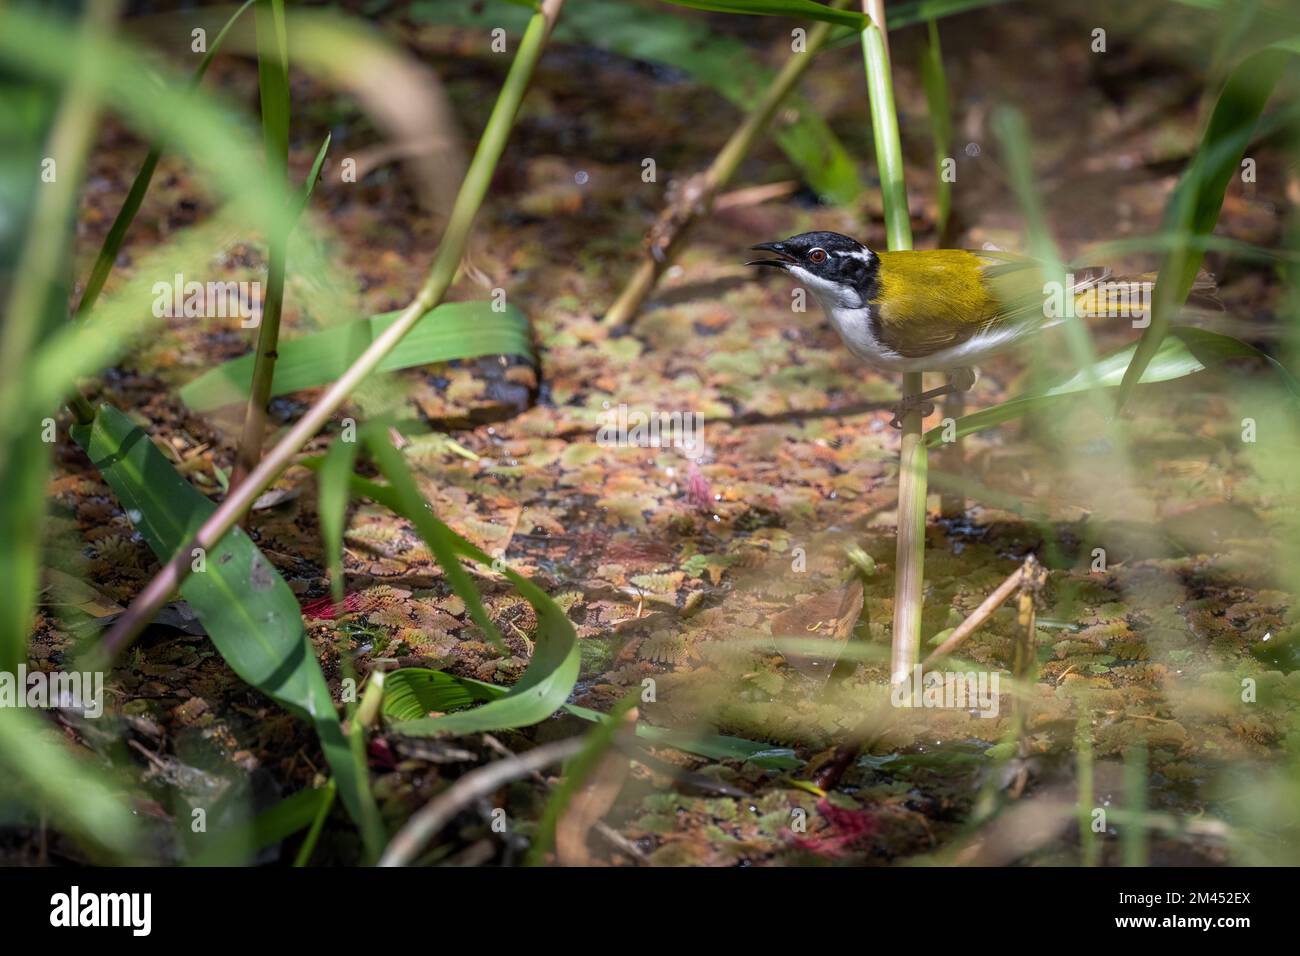 A single White-throated Honeyeater is perched over a small puddle ready to take a drink at Abattoir Swamp near Mount Molloy, Queensland, Australia. Stock Photo